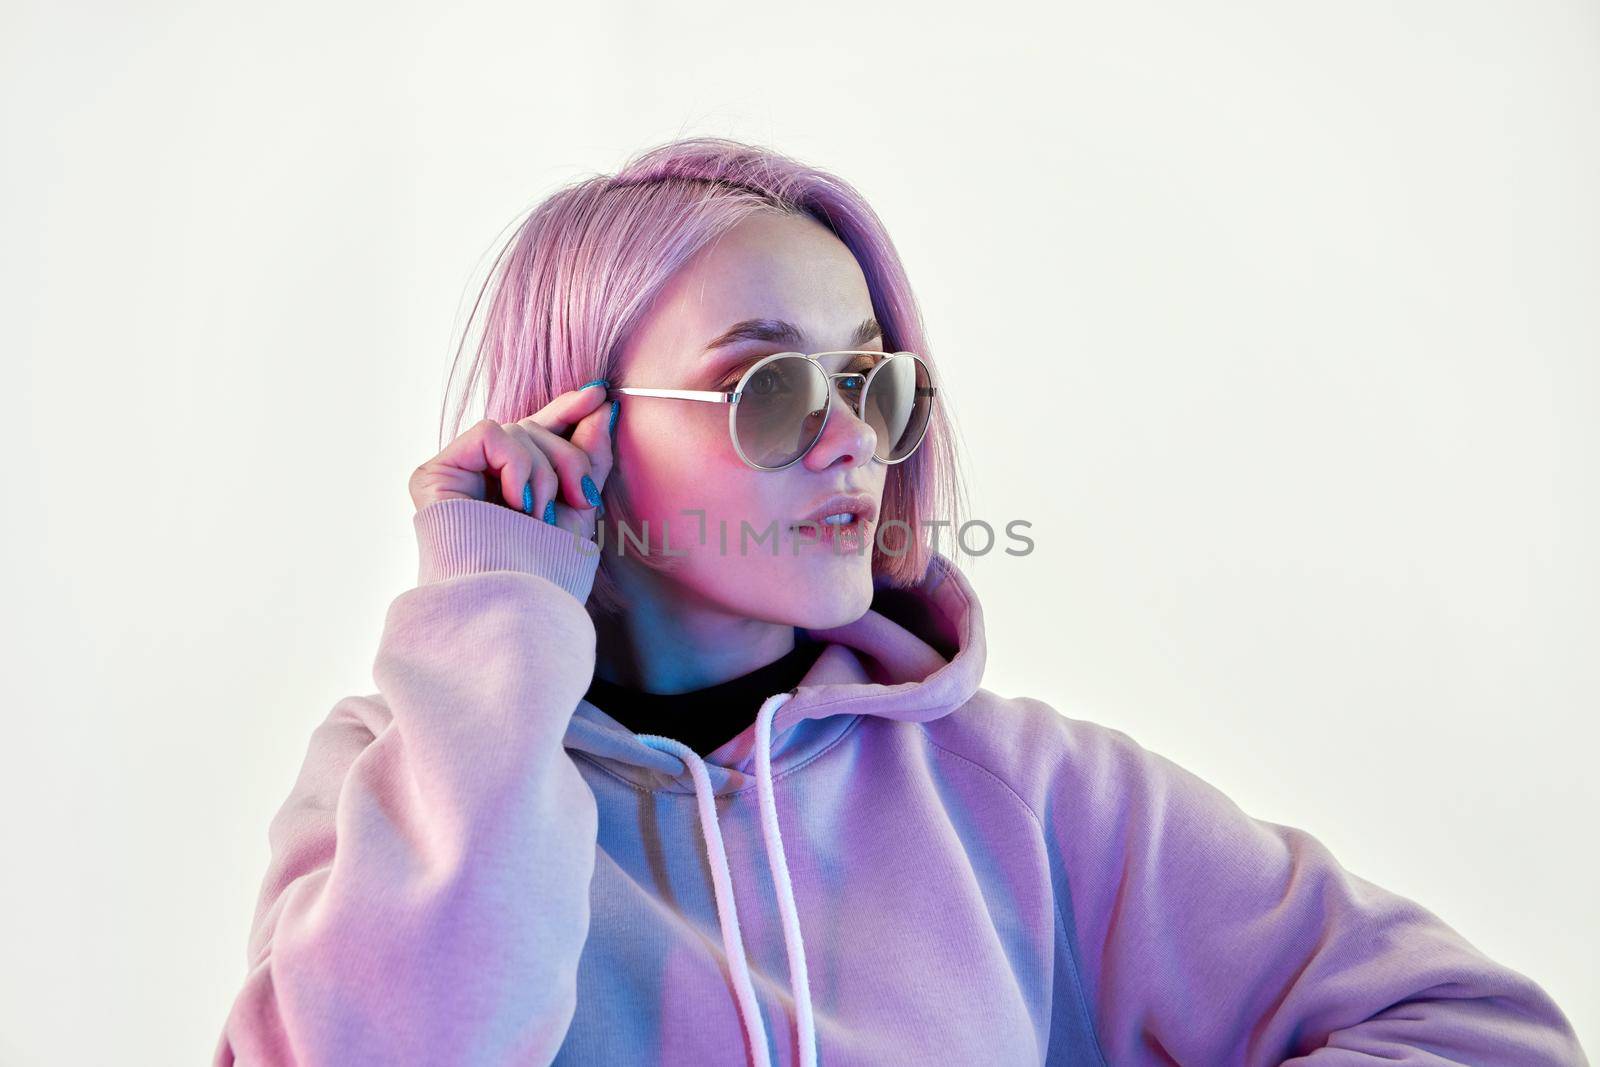 Woman with pink hair in sunglasses on white background by Demkat